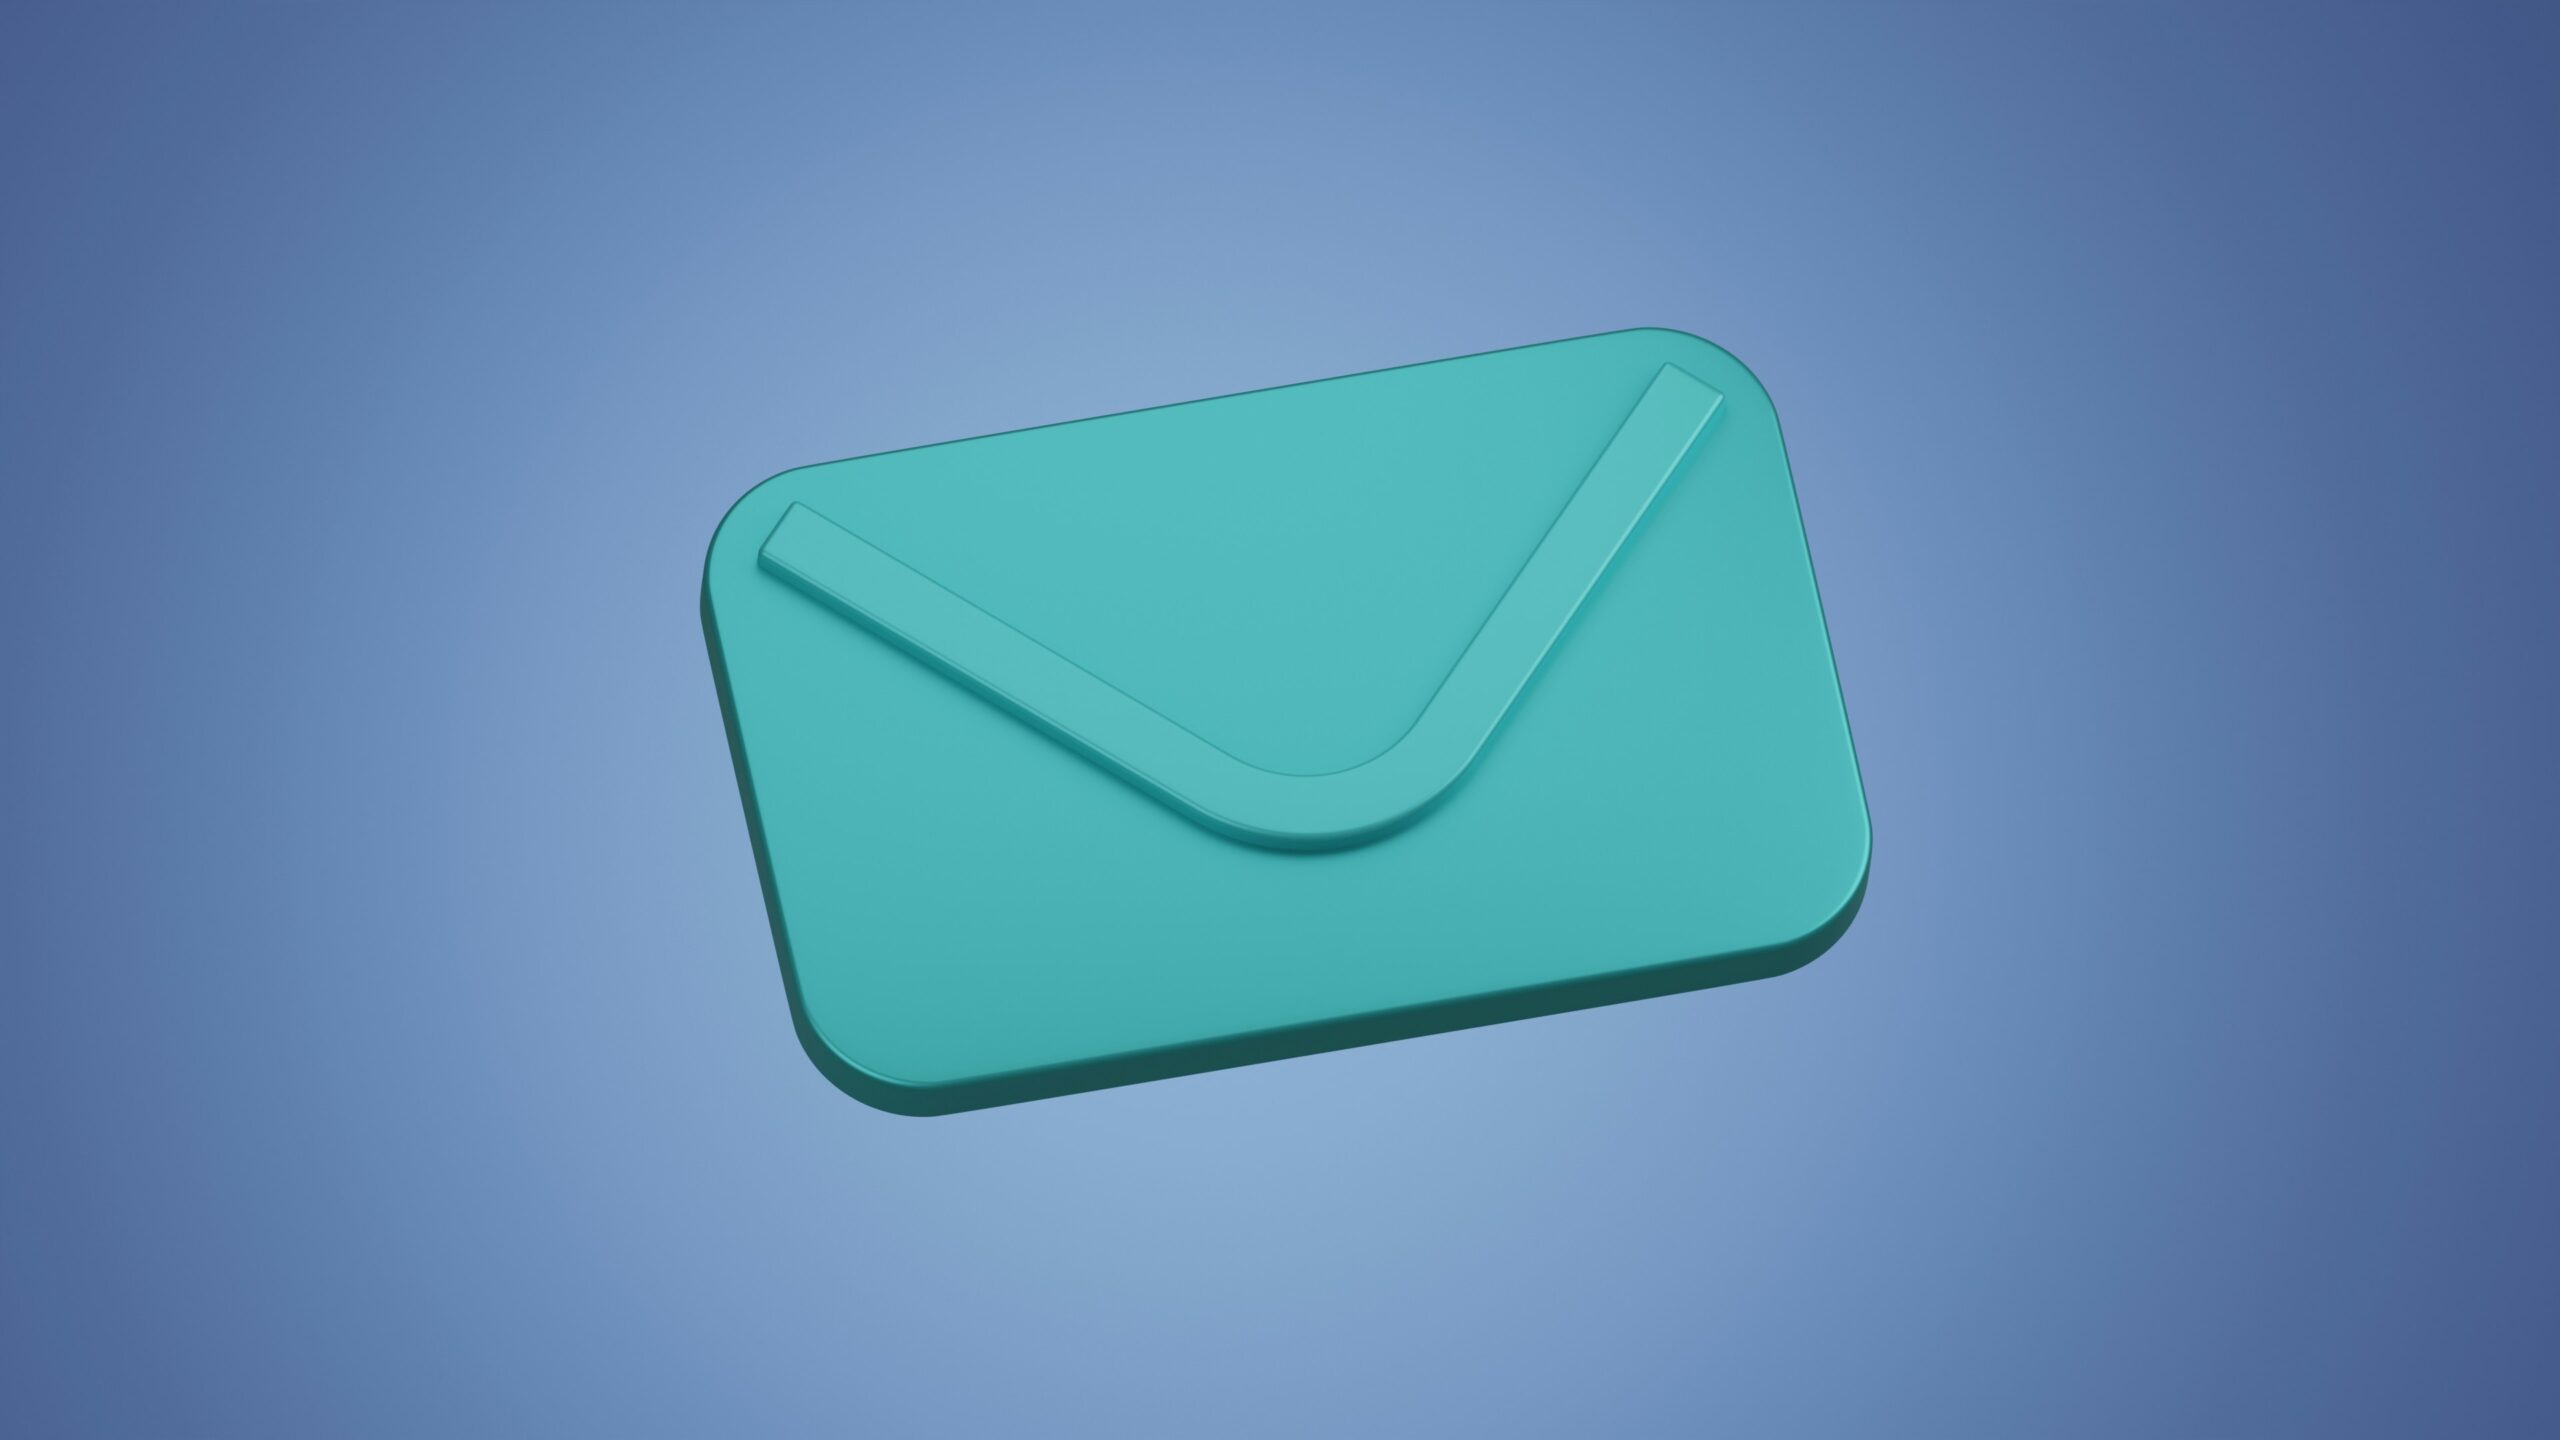 An envelope 3D model on a blue background representing email security with SEGs.